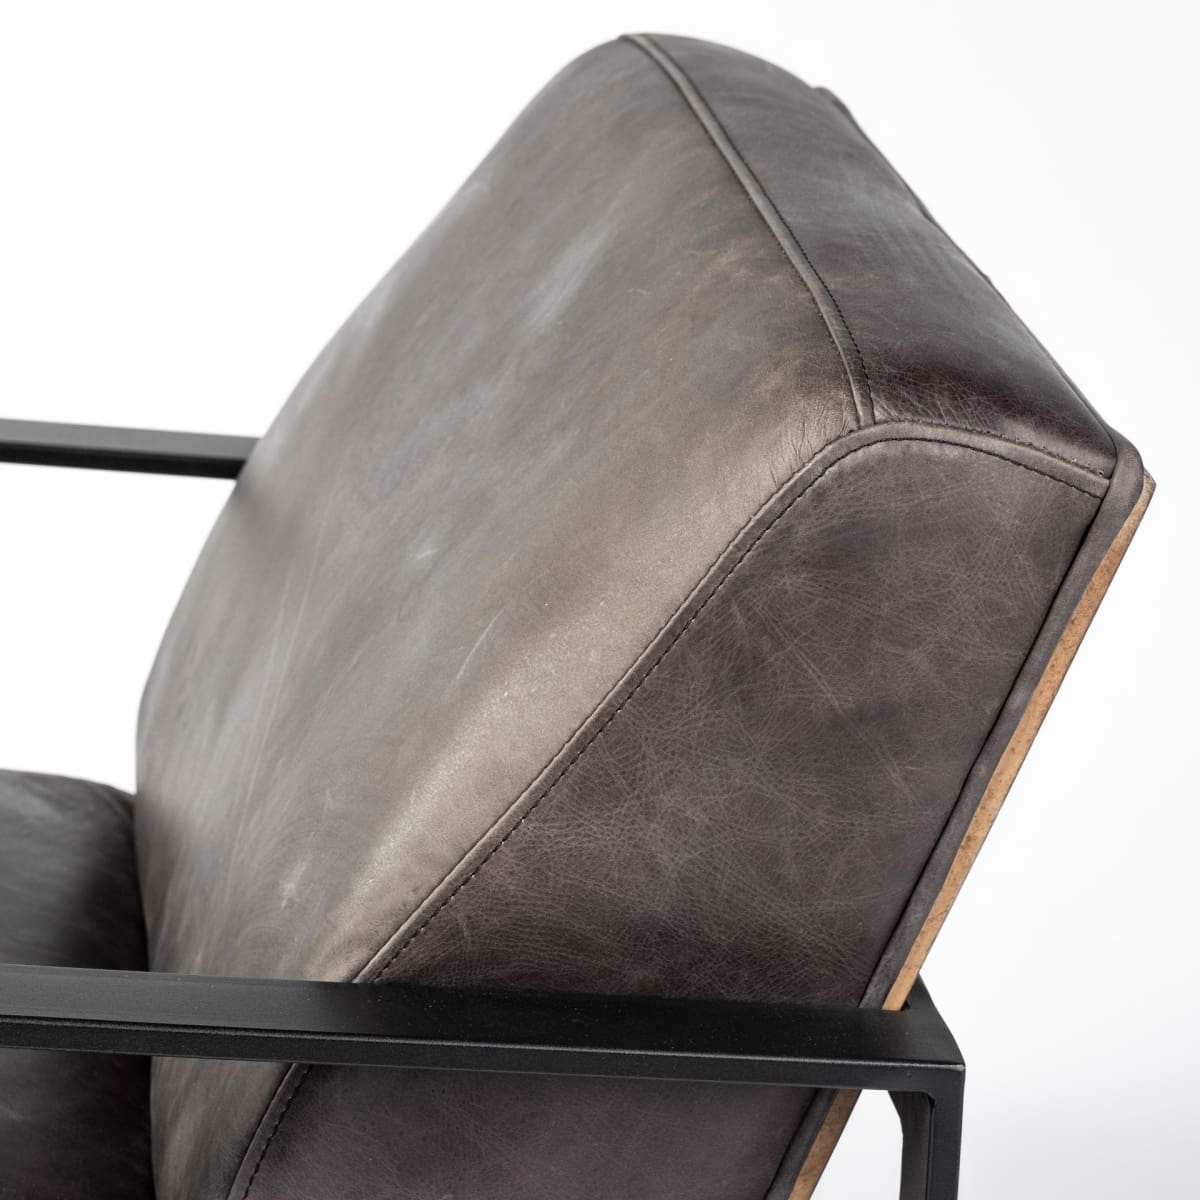 Stamford Accent Chair Black Leather | Black Metal - accent-chairs